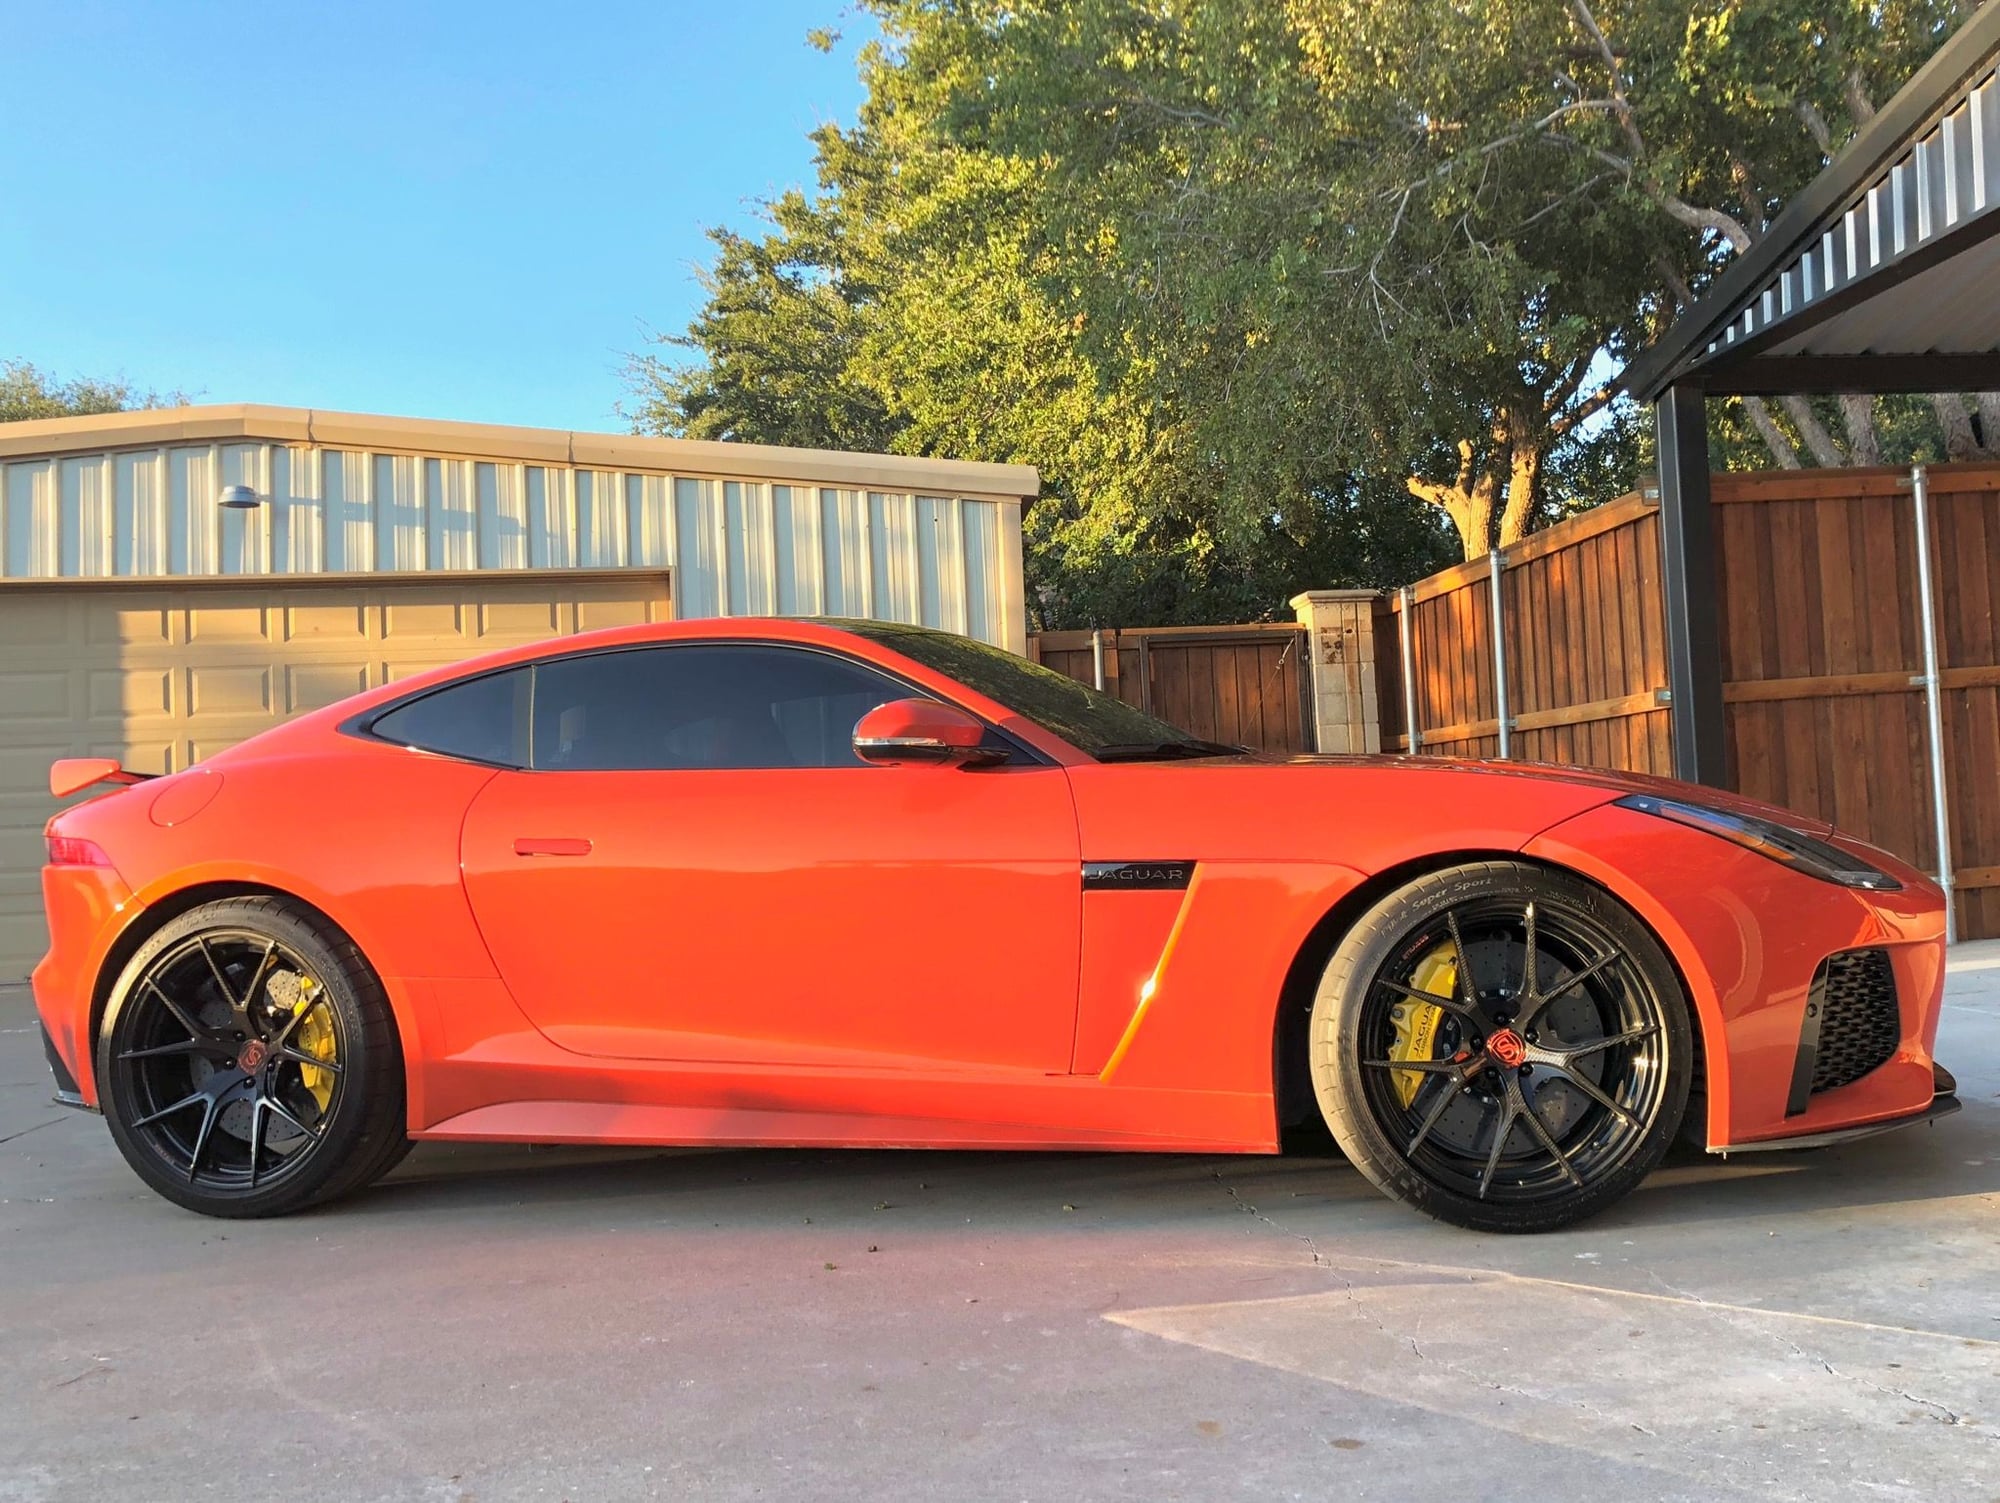 Wheels and Tires/Axles - Strasse Wheels and Pilot Super Sport tires - Used - 2015 to 2019 Jaguar F-Type - Lubbock, TX 79424, United States